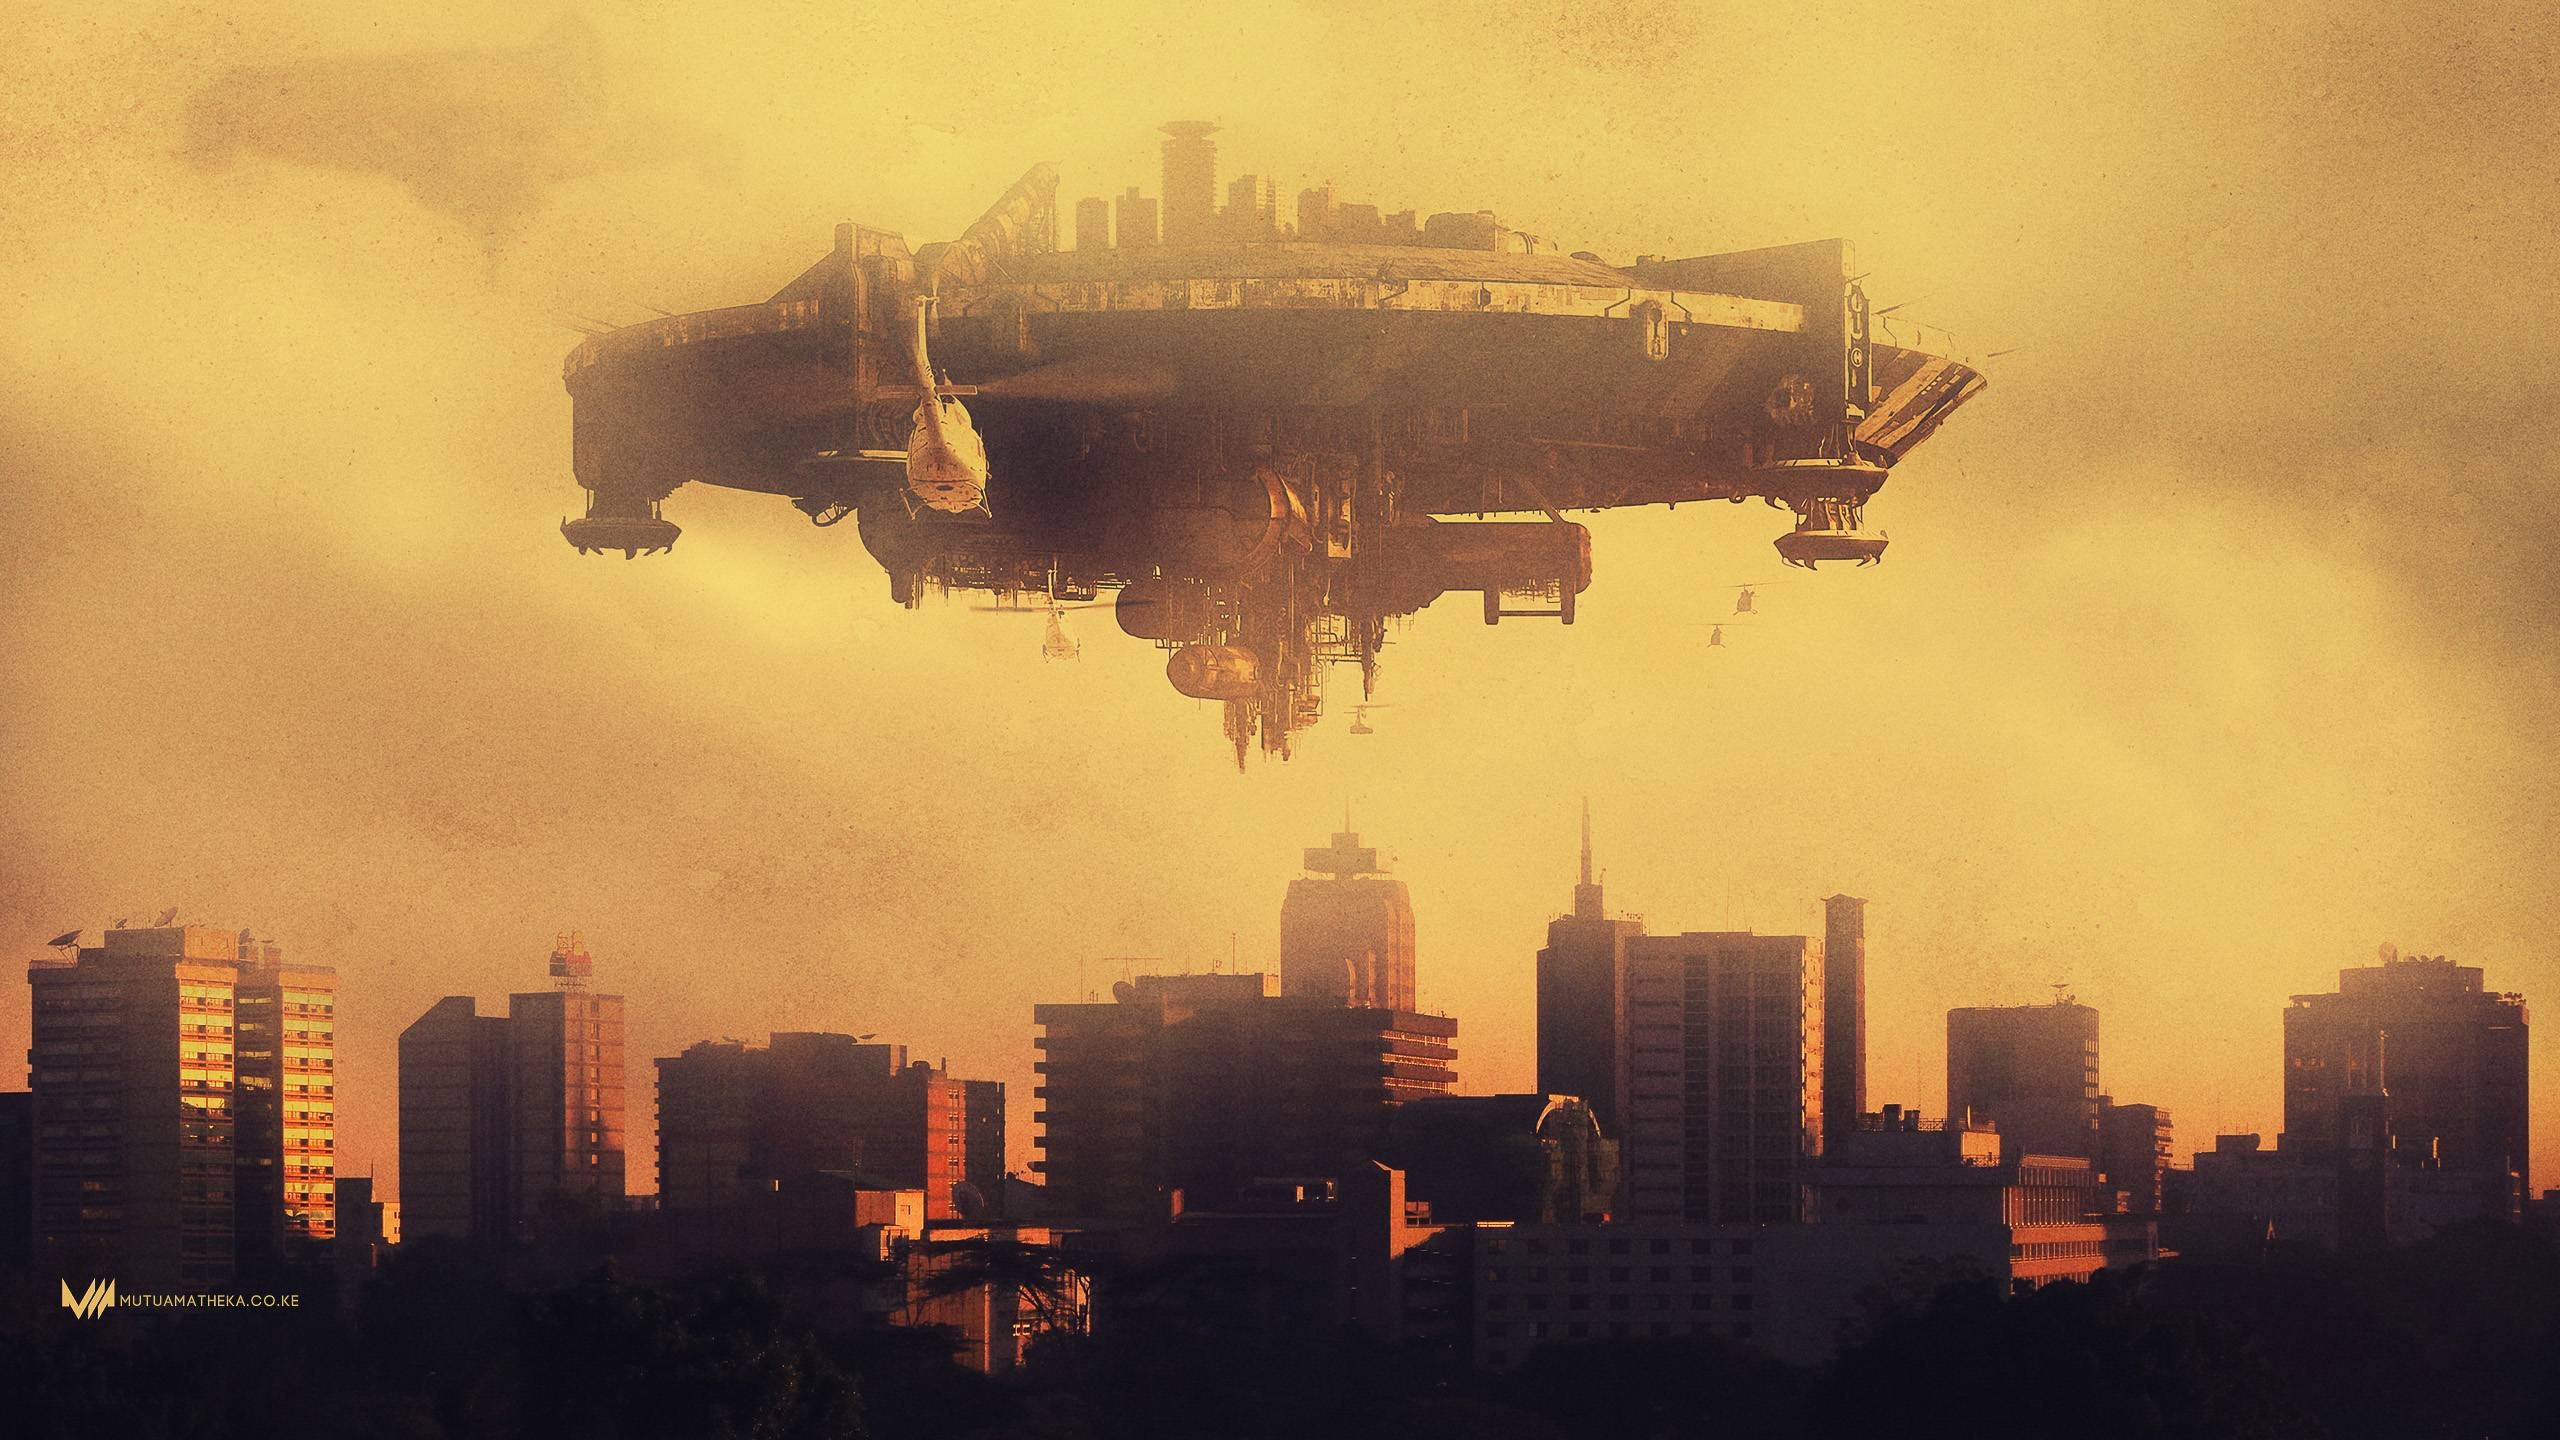 District 9: The story, which explores themes of humanity, xenophobia, and social segregation, begins in an alternate 1982 when an alien spaceship appears over Johannesburg, South Africa. 2560x1440 HD Wallpaper.